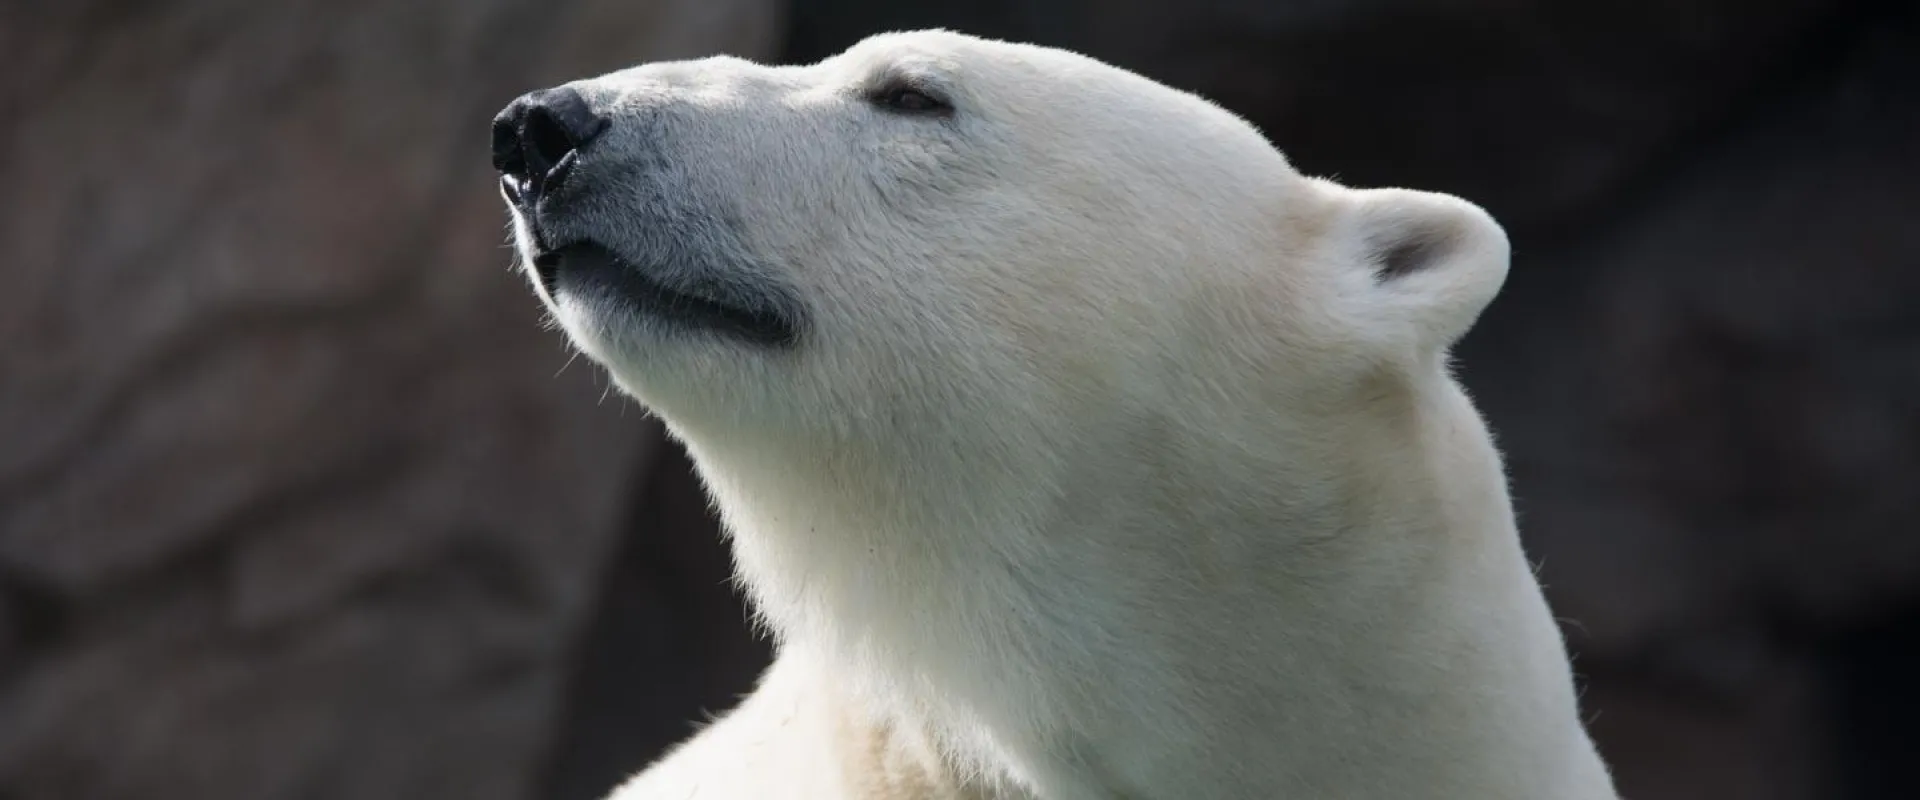 Climate in Crisis: How Polar Bears Helped Me 